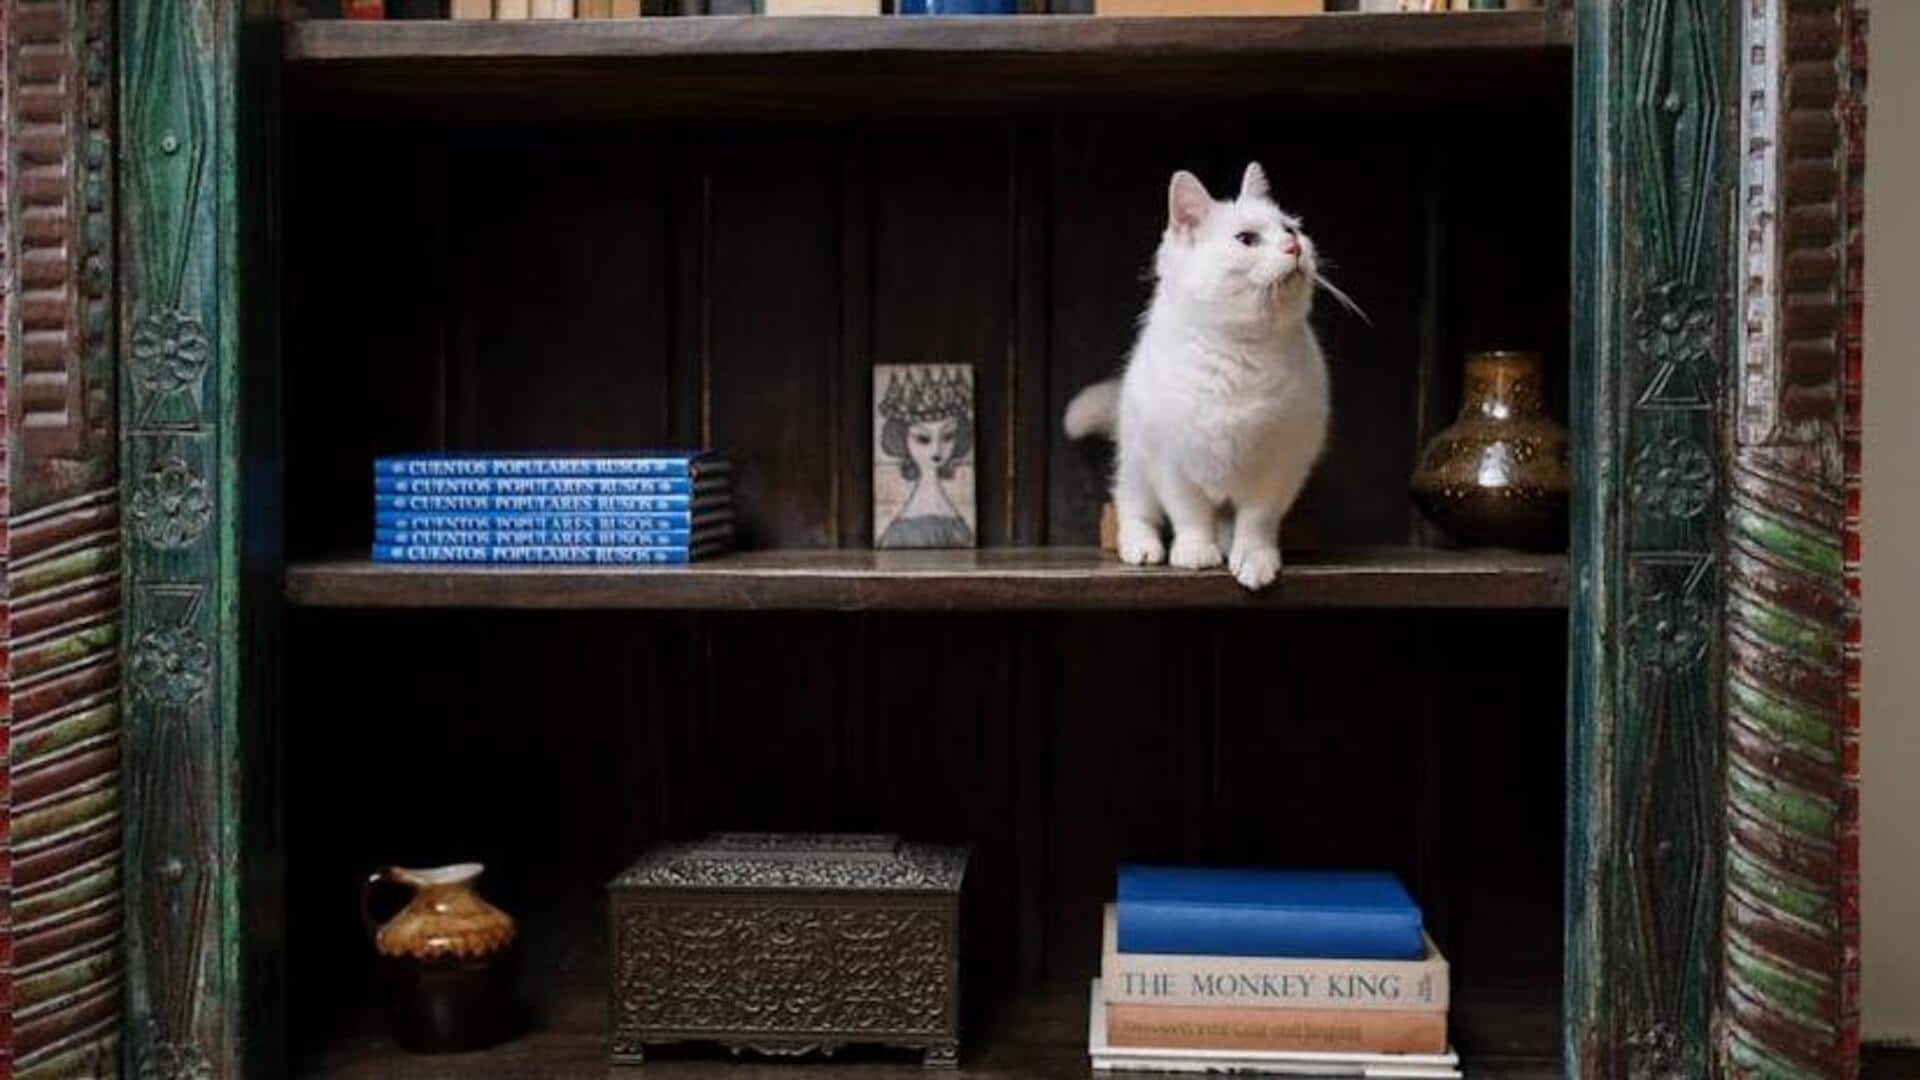 Cat lovers will love reading these books